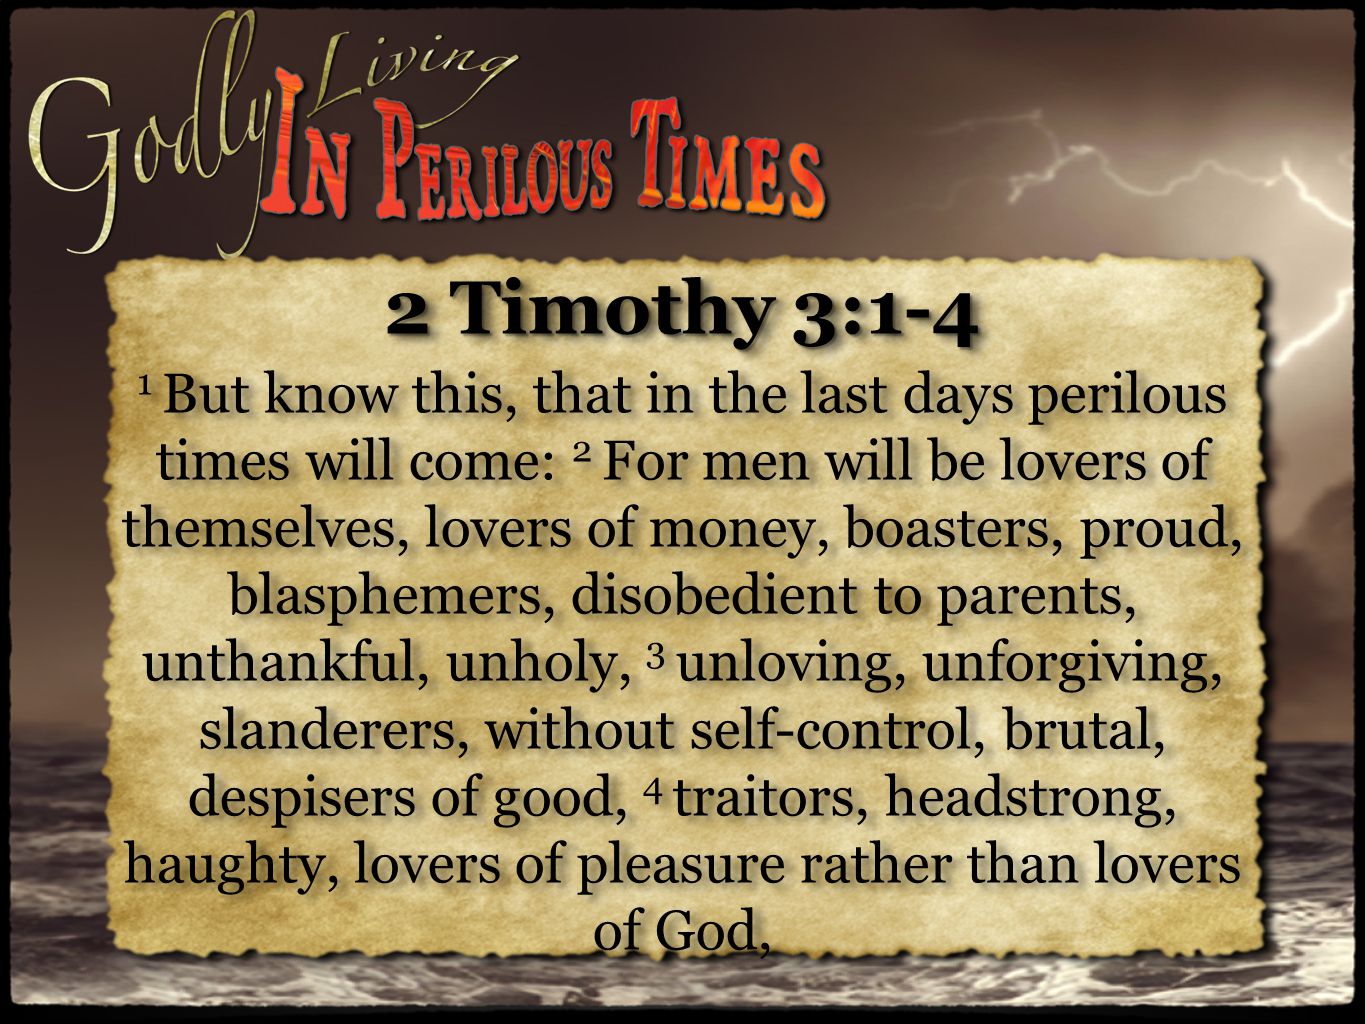 2 Timothy 3:1-4 1 But know this, that in the last days perilous times will come: 2 For men will be lovers of themselves, lovers of money, boasters, proud, blasphemers, disobedient to parents, unthankful, unholy, 3 unloving, unforgiving, slanderers, without self-control, brutal, despisers of good, 4 traitors, headstrong, haughty, lovers of pleasure rather than lovers of God, 2 Timothy 3:1-4 1 But know this, that in the last days perilous times will come: 2 For men will be lovers of themselves, lovers of money, boasters, proud, blasphemers, disobedient to parents, unthankful, unholy, 3 unloving, unforgiving, slanderers, without self-control, brutal, despisers of good, 4 traitors, headstrong, haughty, lovers of pleasure rather than lovers of God,